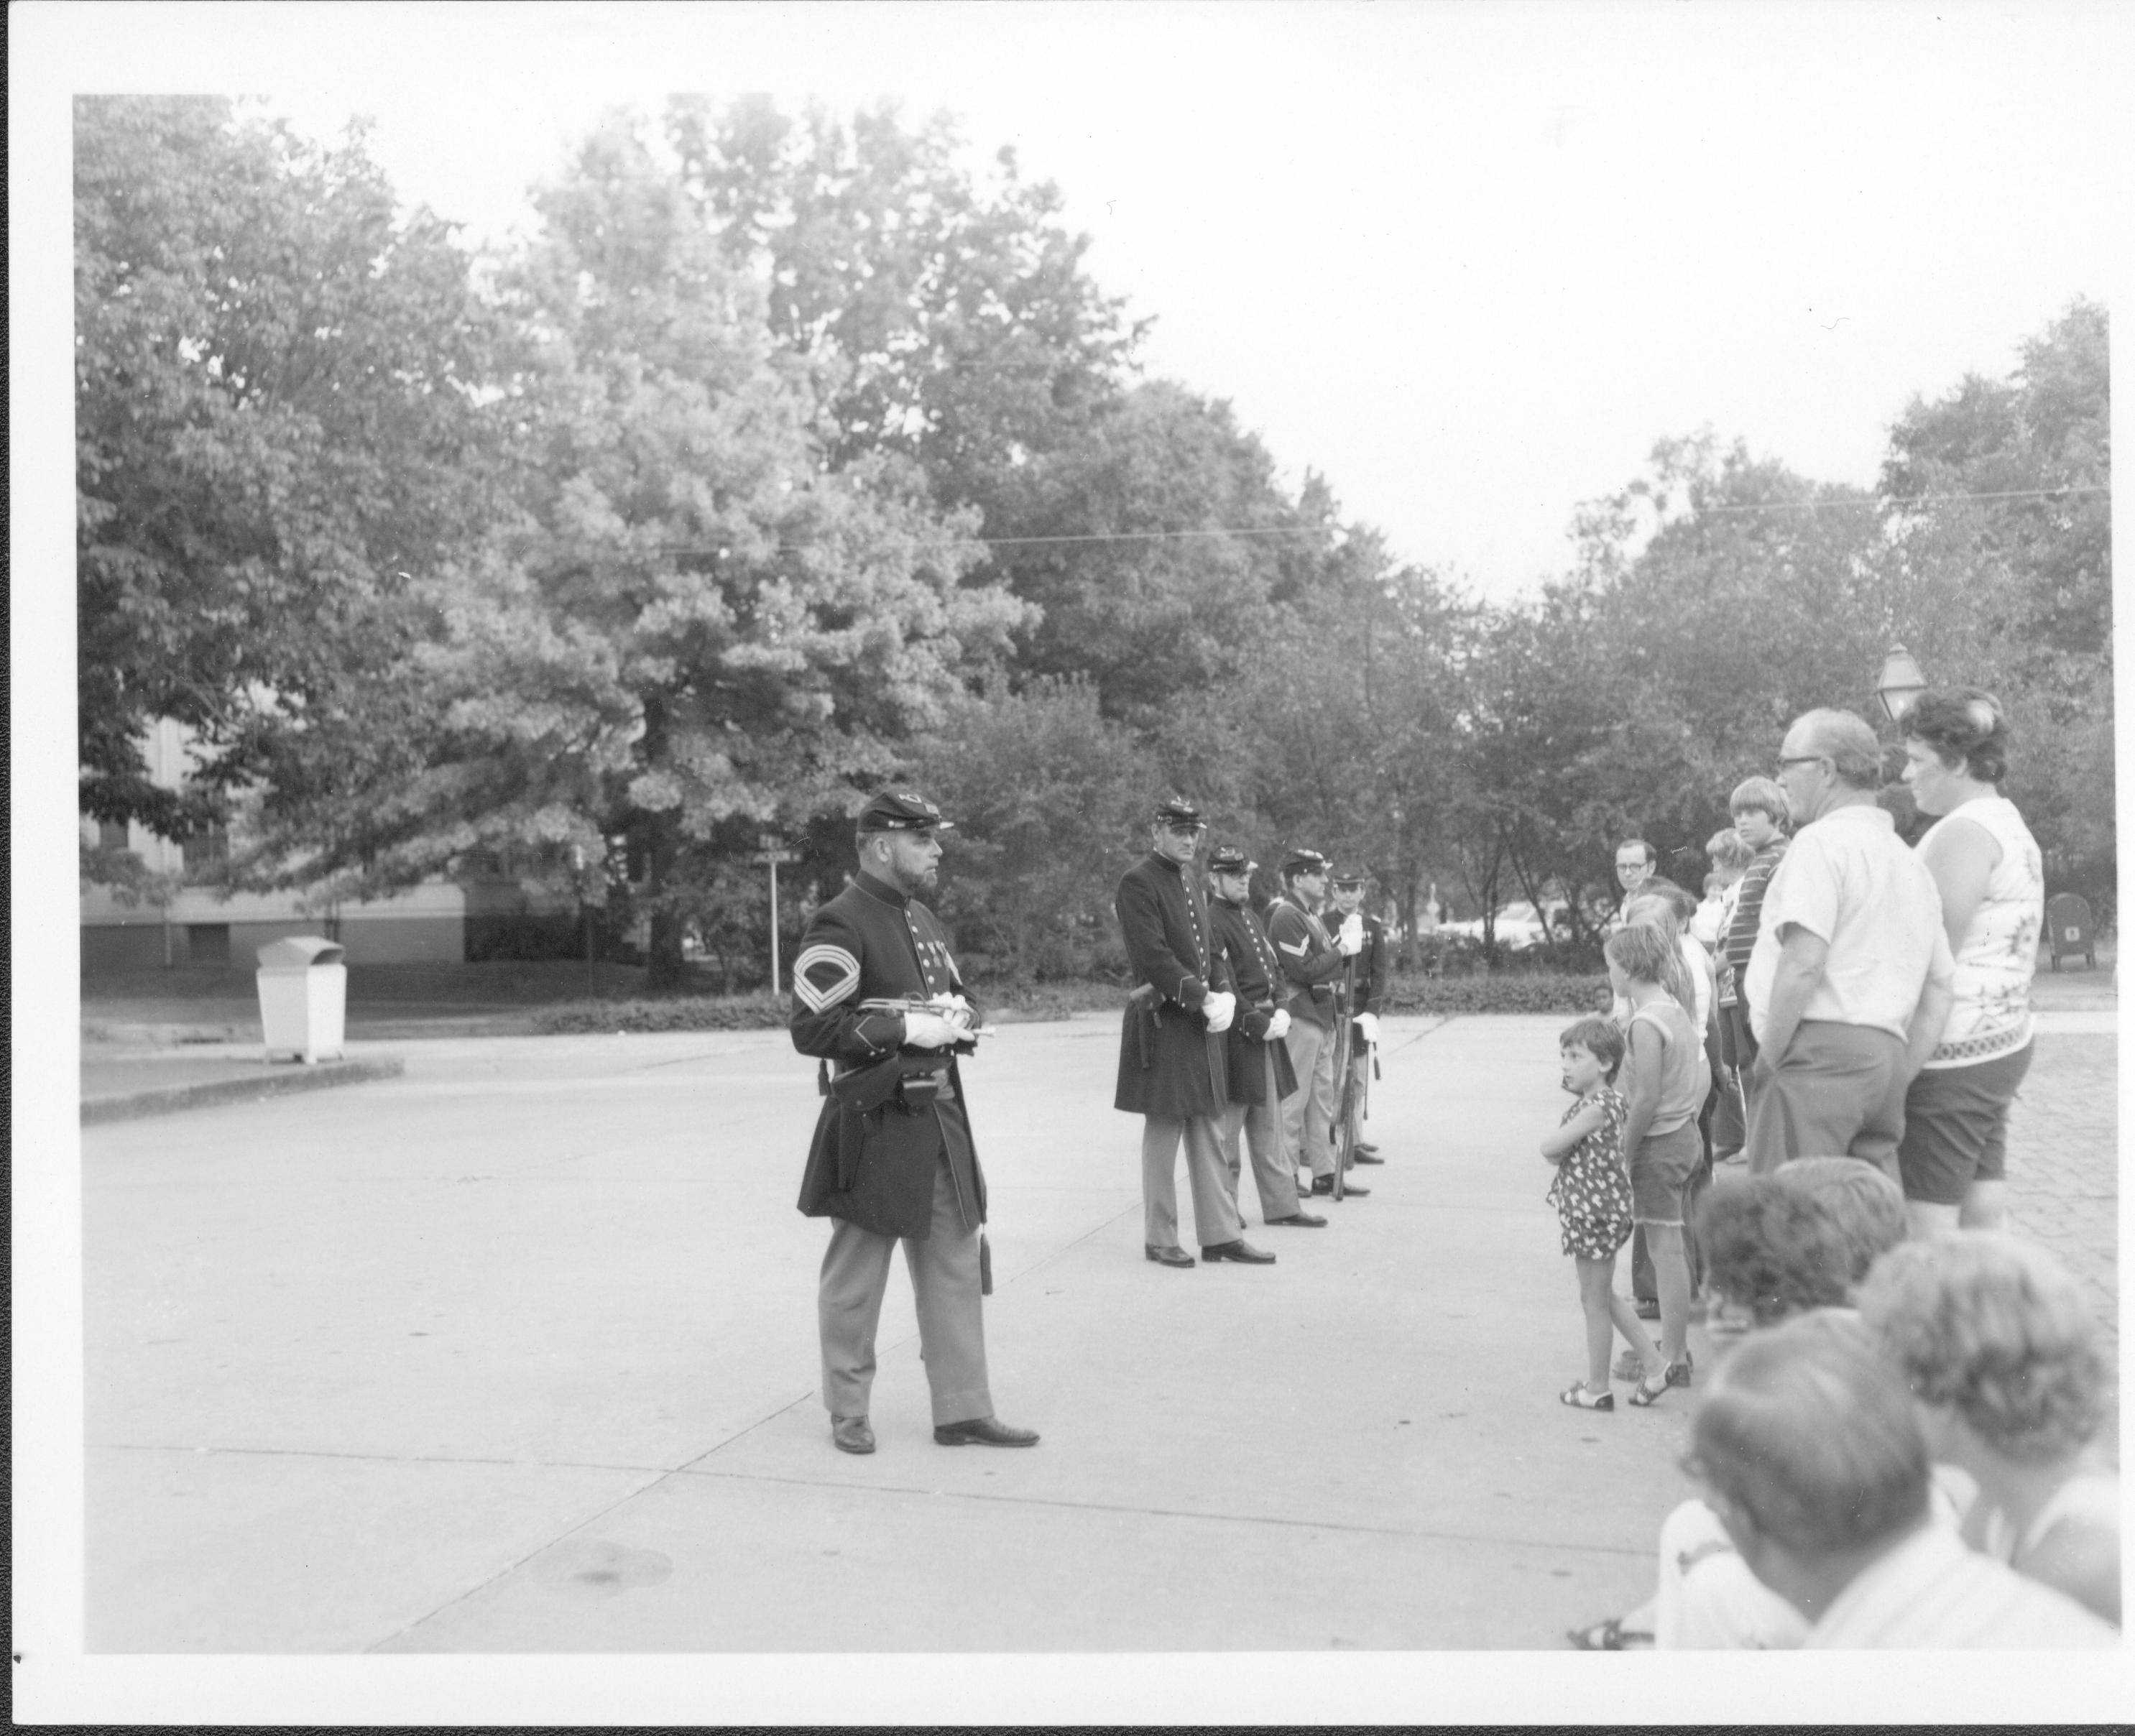 114th Illinois Volunteer Infantry, questions from the visitors Lincoln Home NHS- LIHO Evening Retreat, neg 21 class 1000, class 8 pic 21 Lincoln Home Project, infantry